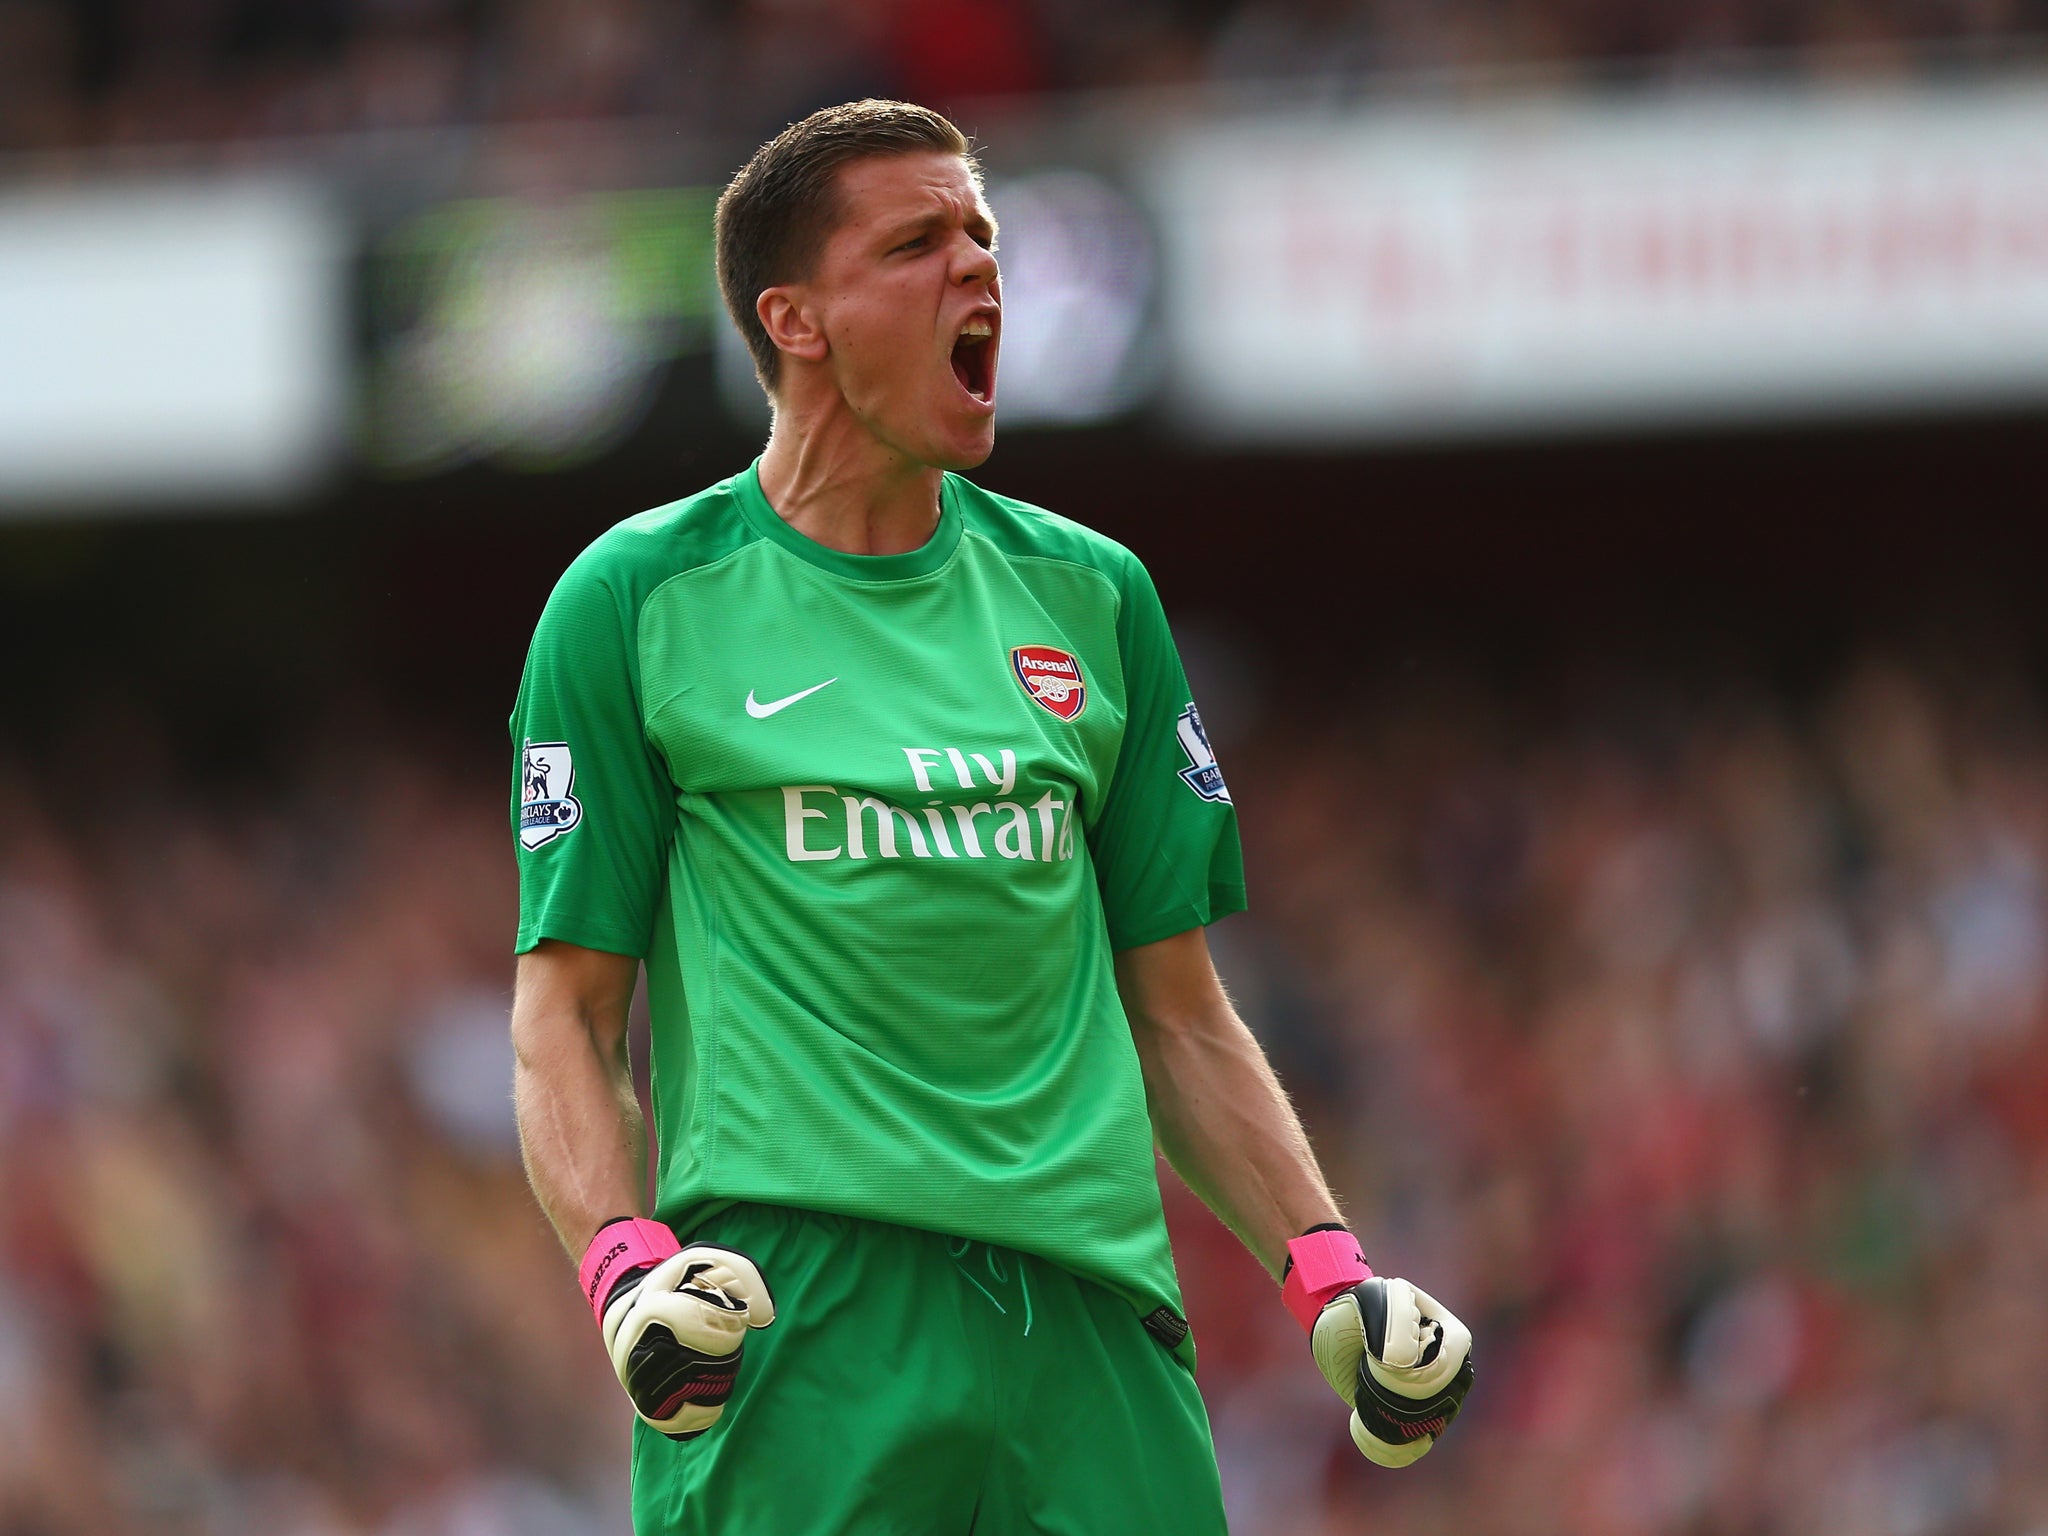 Arsenal goalkeeper Wojciech Szczesny recently signed a new long-term contract with the club